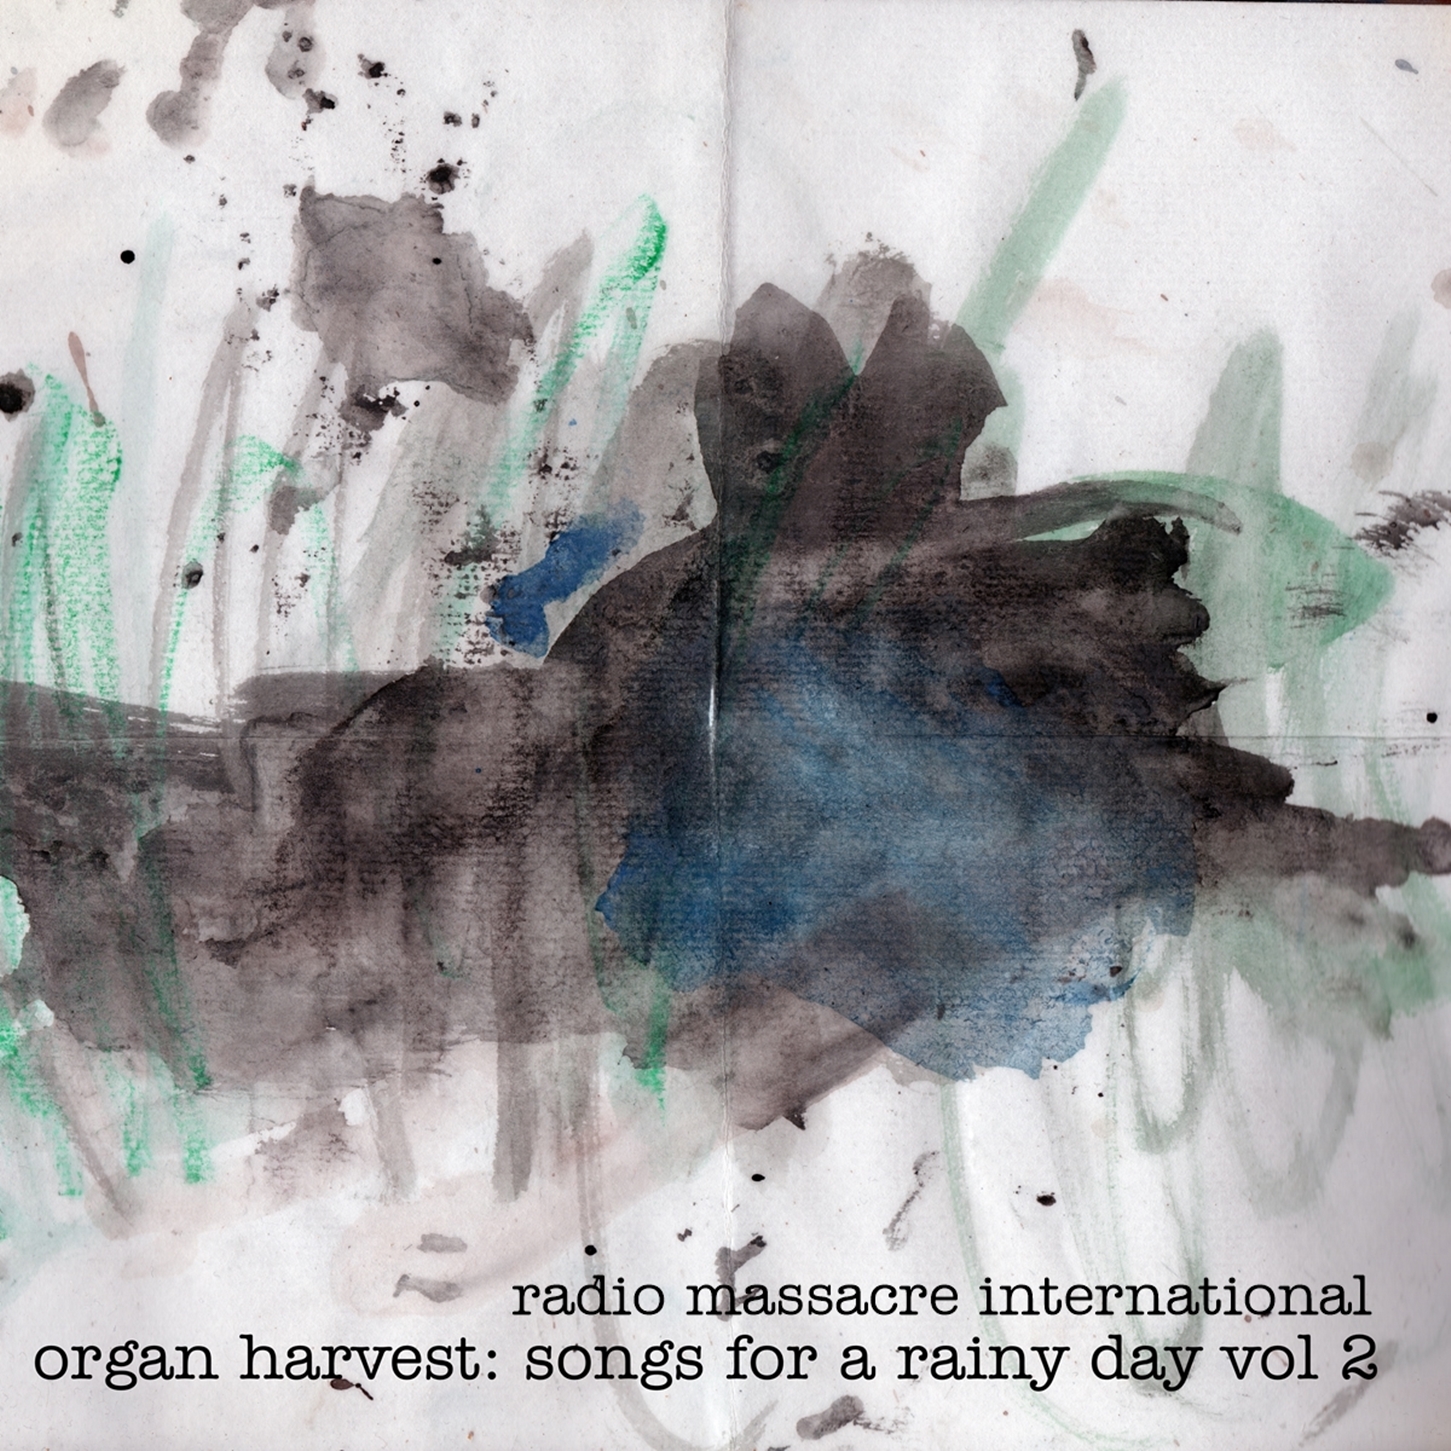 organ harvest: songs for a rainy day vol 2